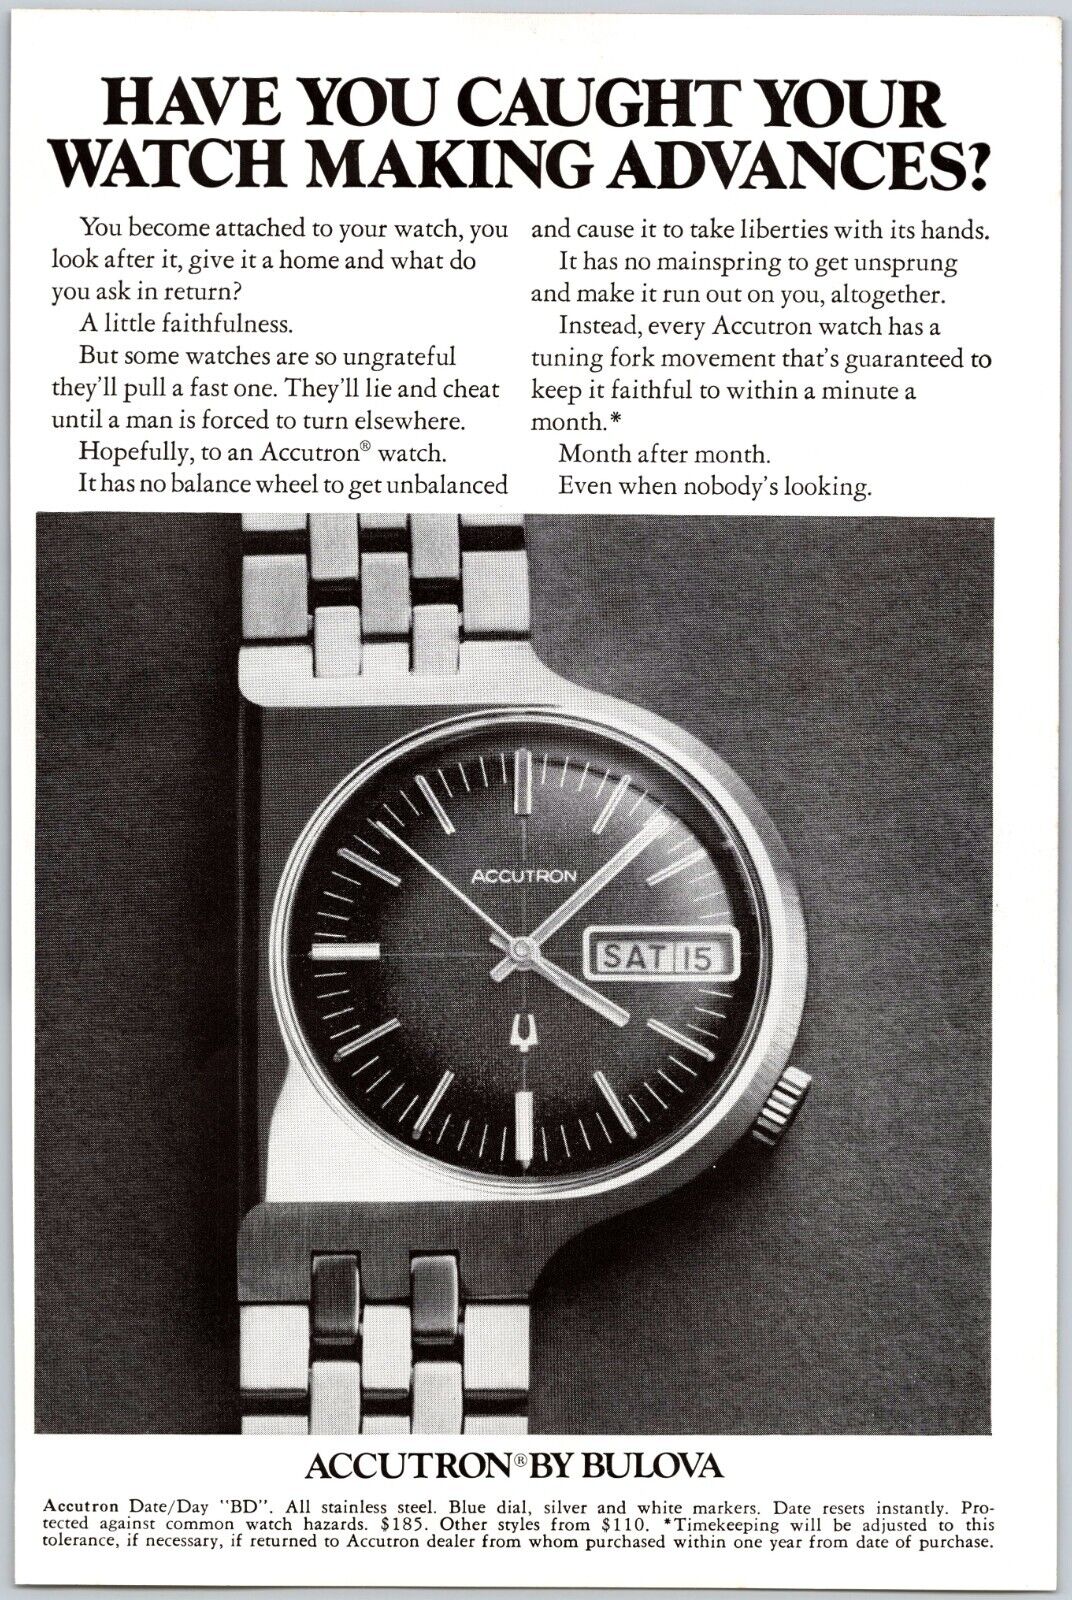 1972 Bulova Accutron Watch Faithful To Within A Minute A Month Print Ad